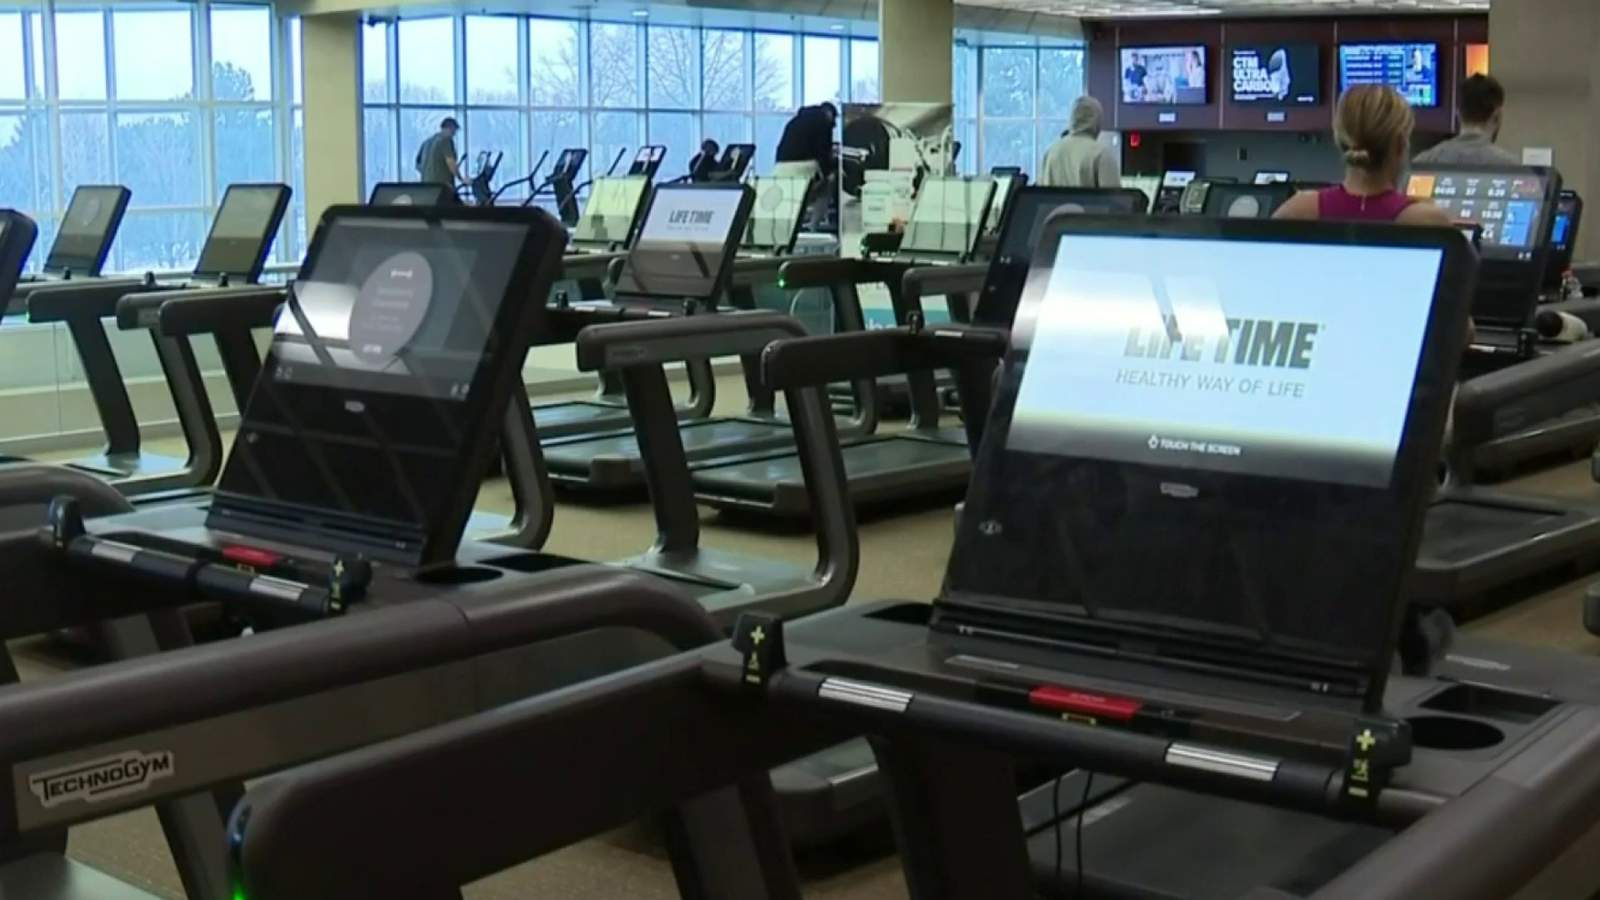 Following the challenges gym owners face as the new year begins